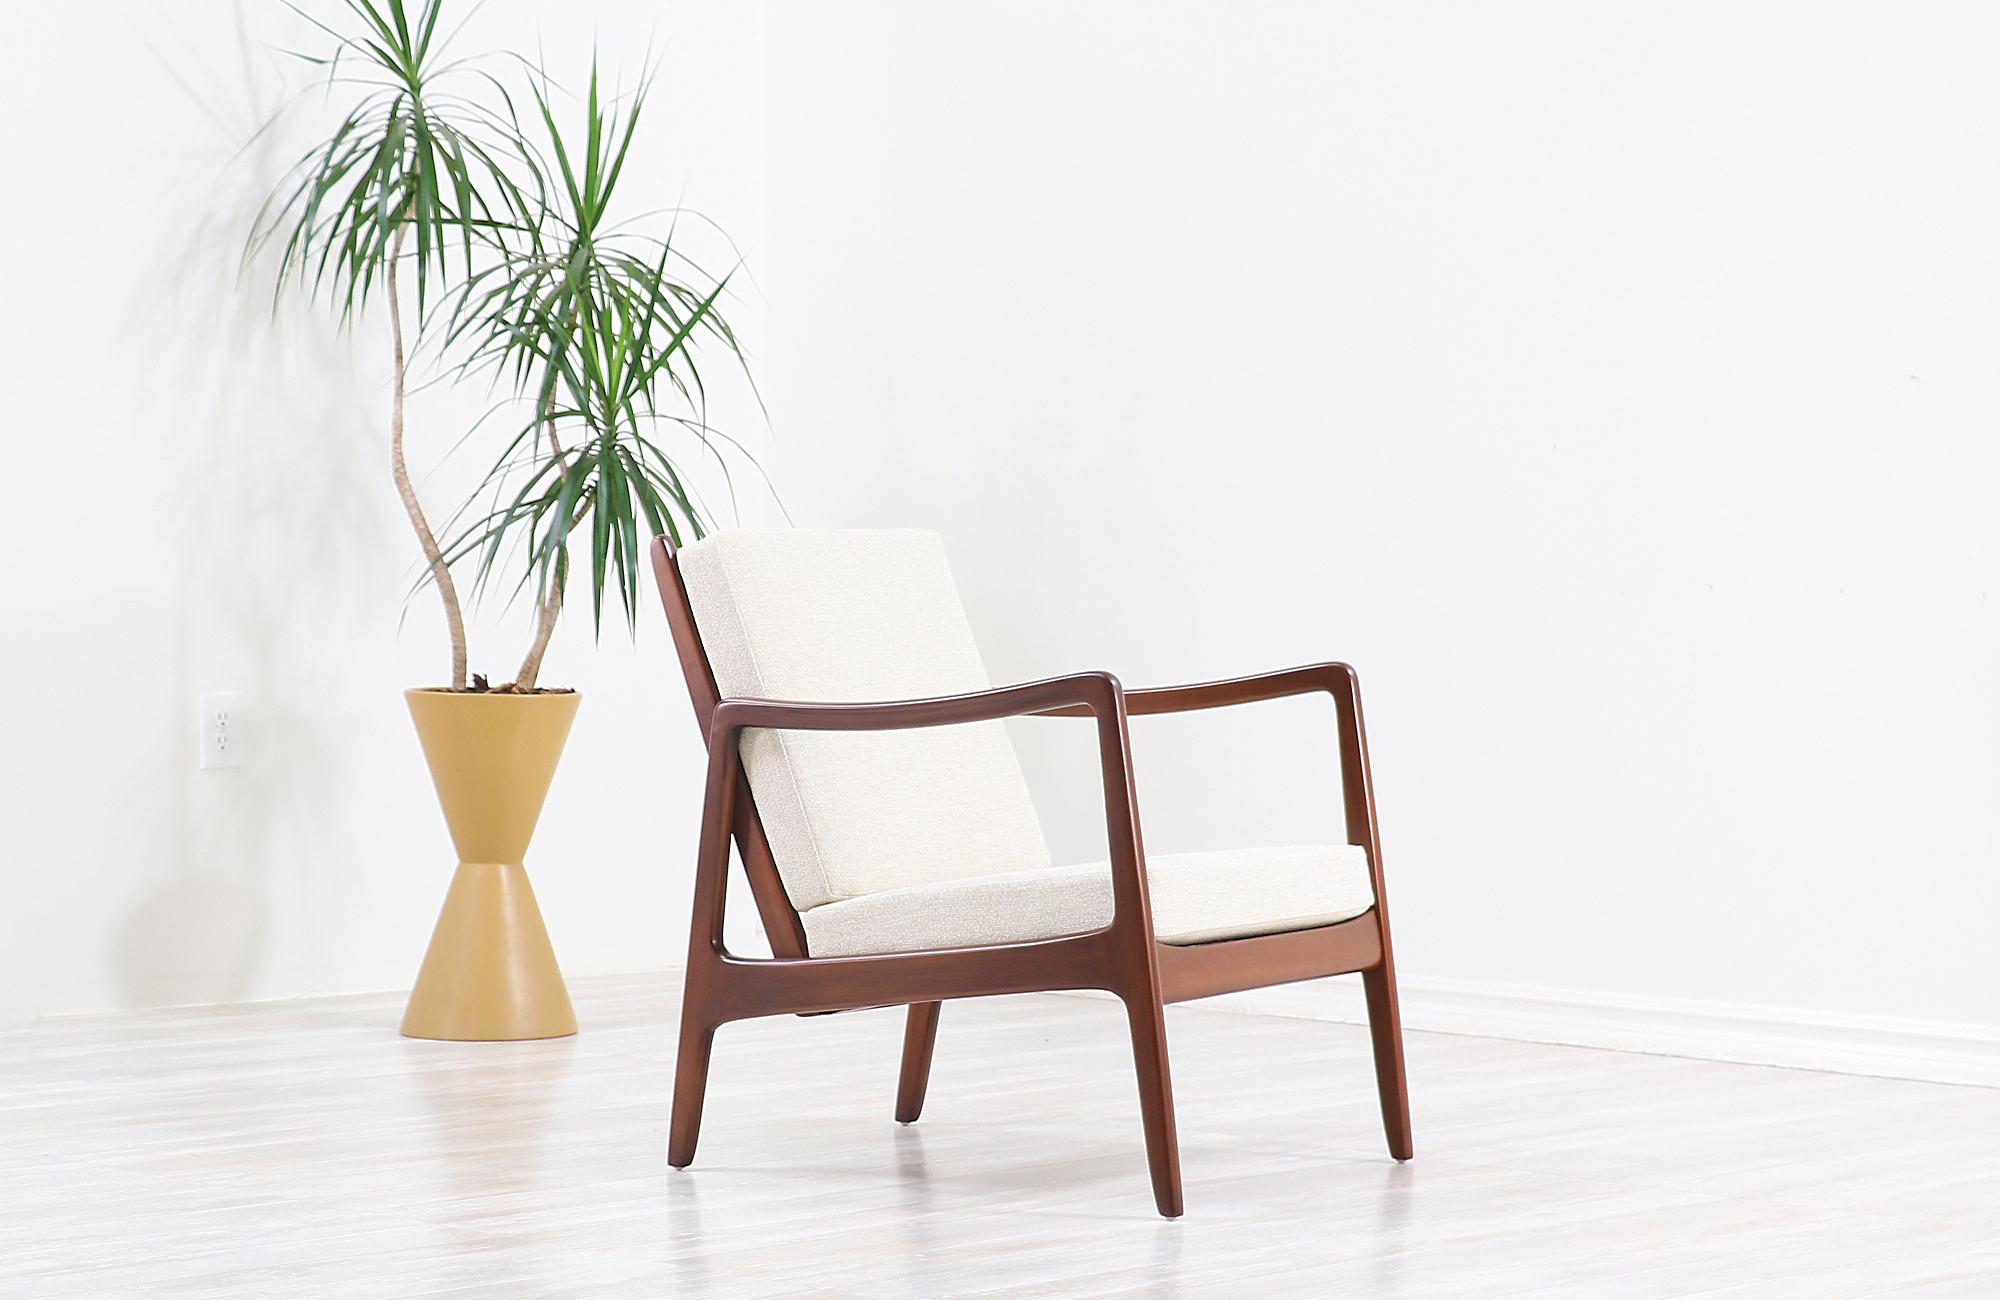 Elegant lounge chair designed by Ole Wanscher for France & Søn in Denmark, circa 1950s. This rare vintage model FD-109 lounge chair maintains the manufacturer’s mark and features a sturdy walnut-stained beechwood frame with a slated open back and